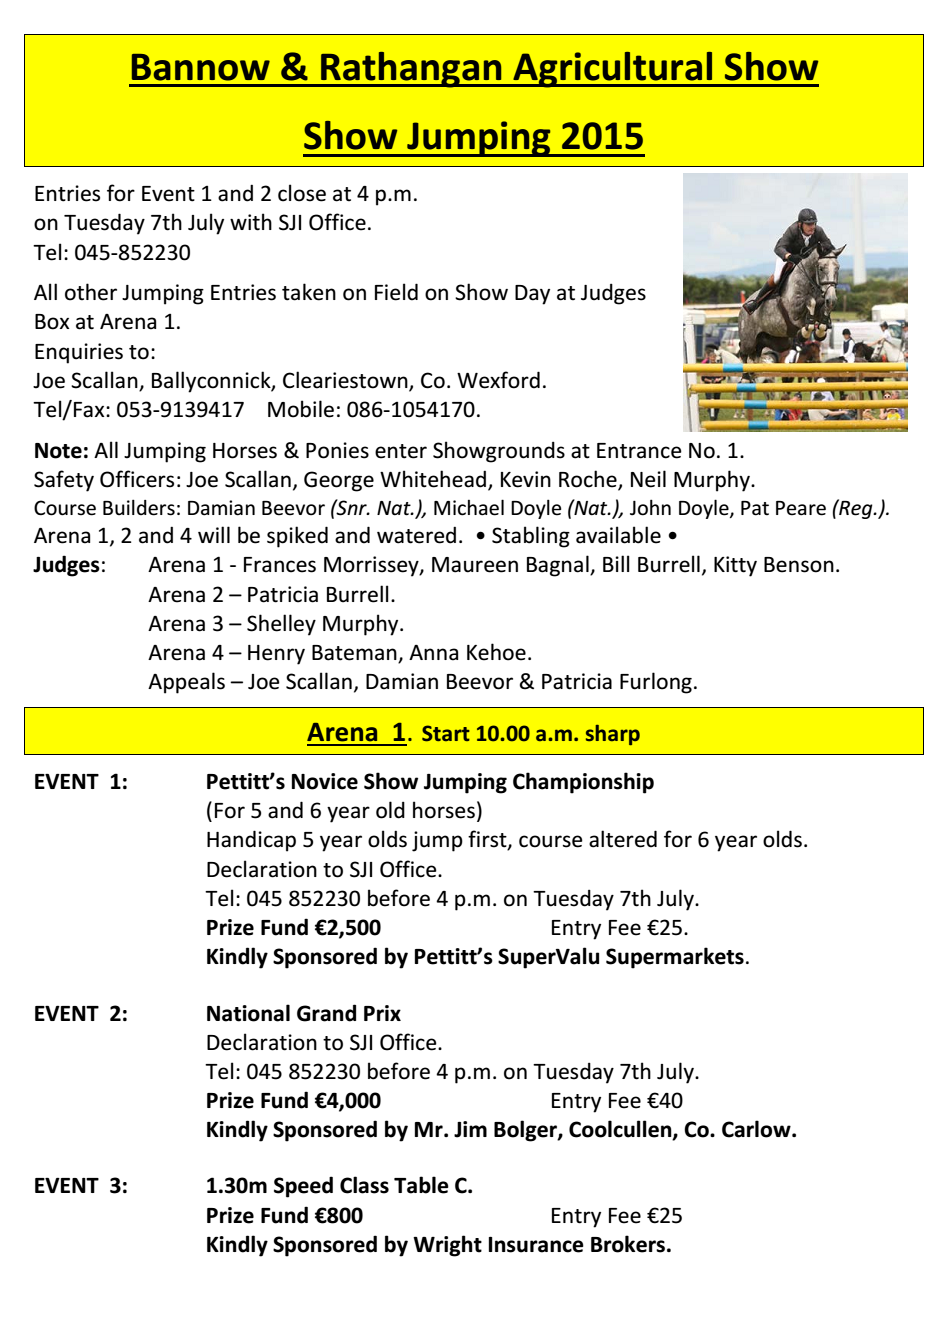 Amended Show Jumping Schedule